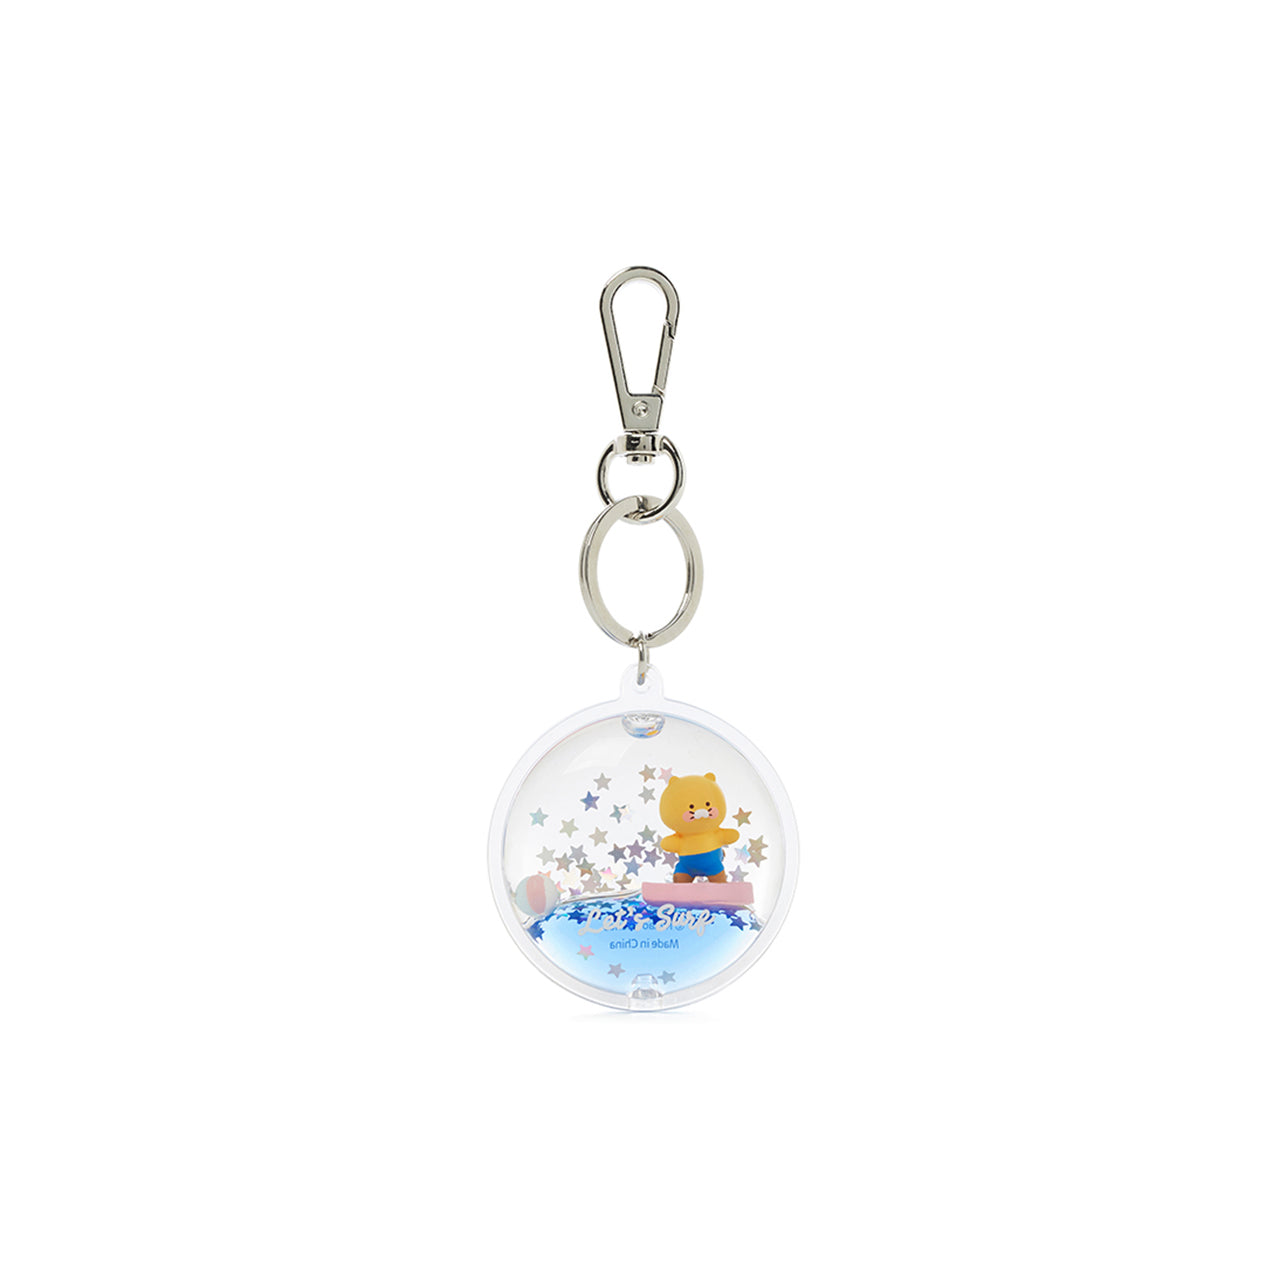 Let's Surf Waterball Keyring